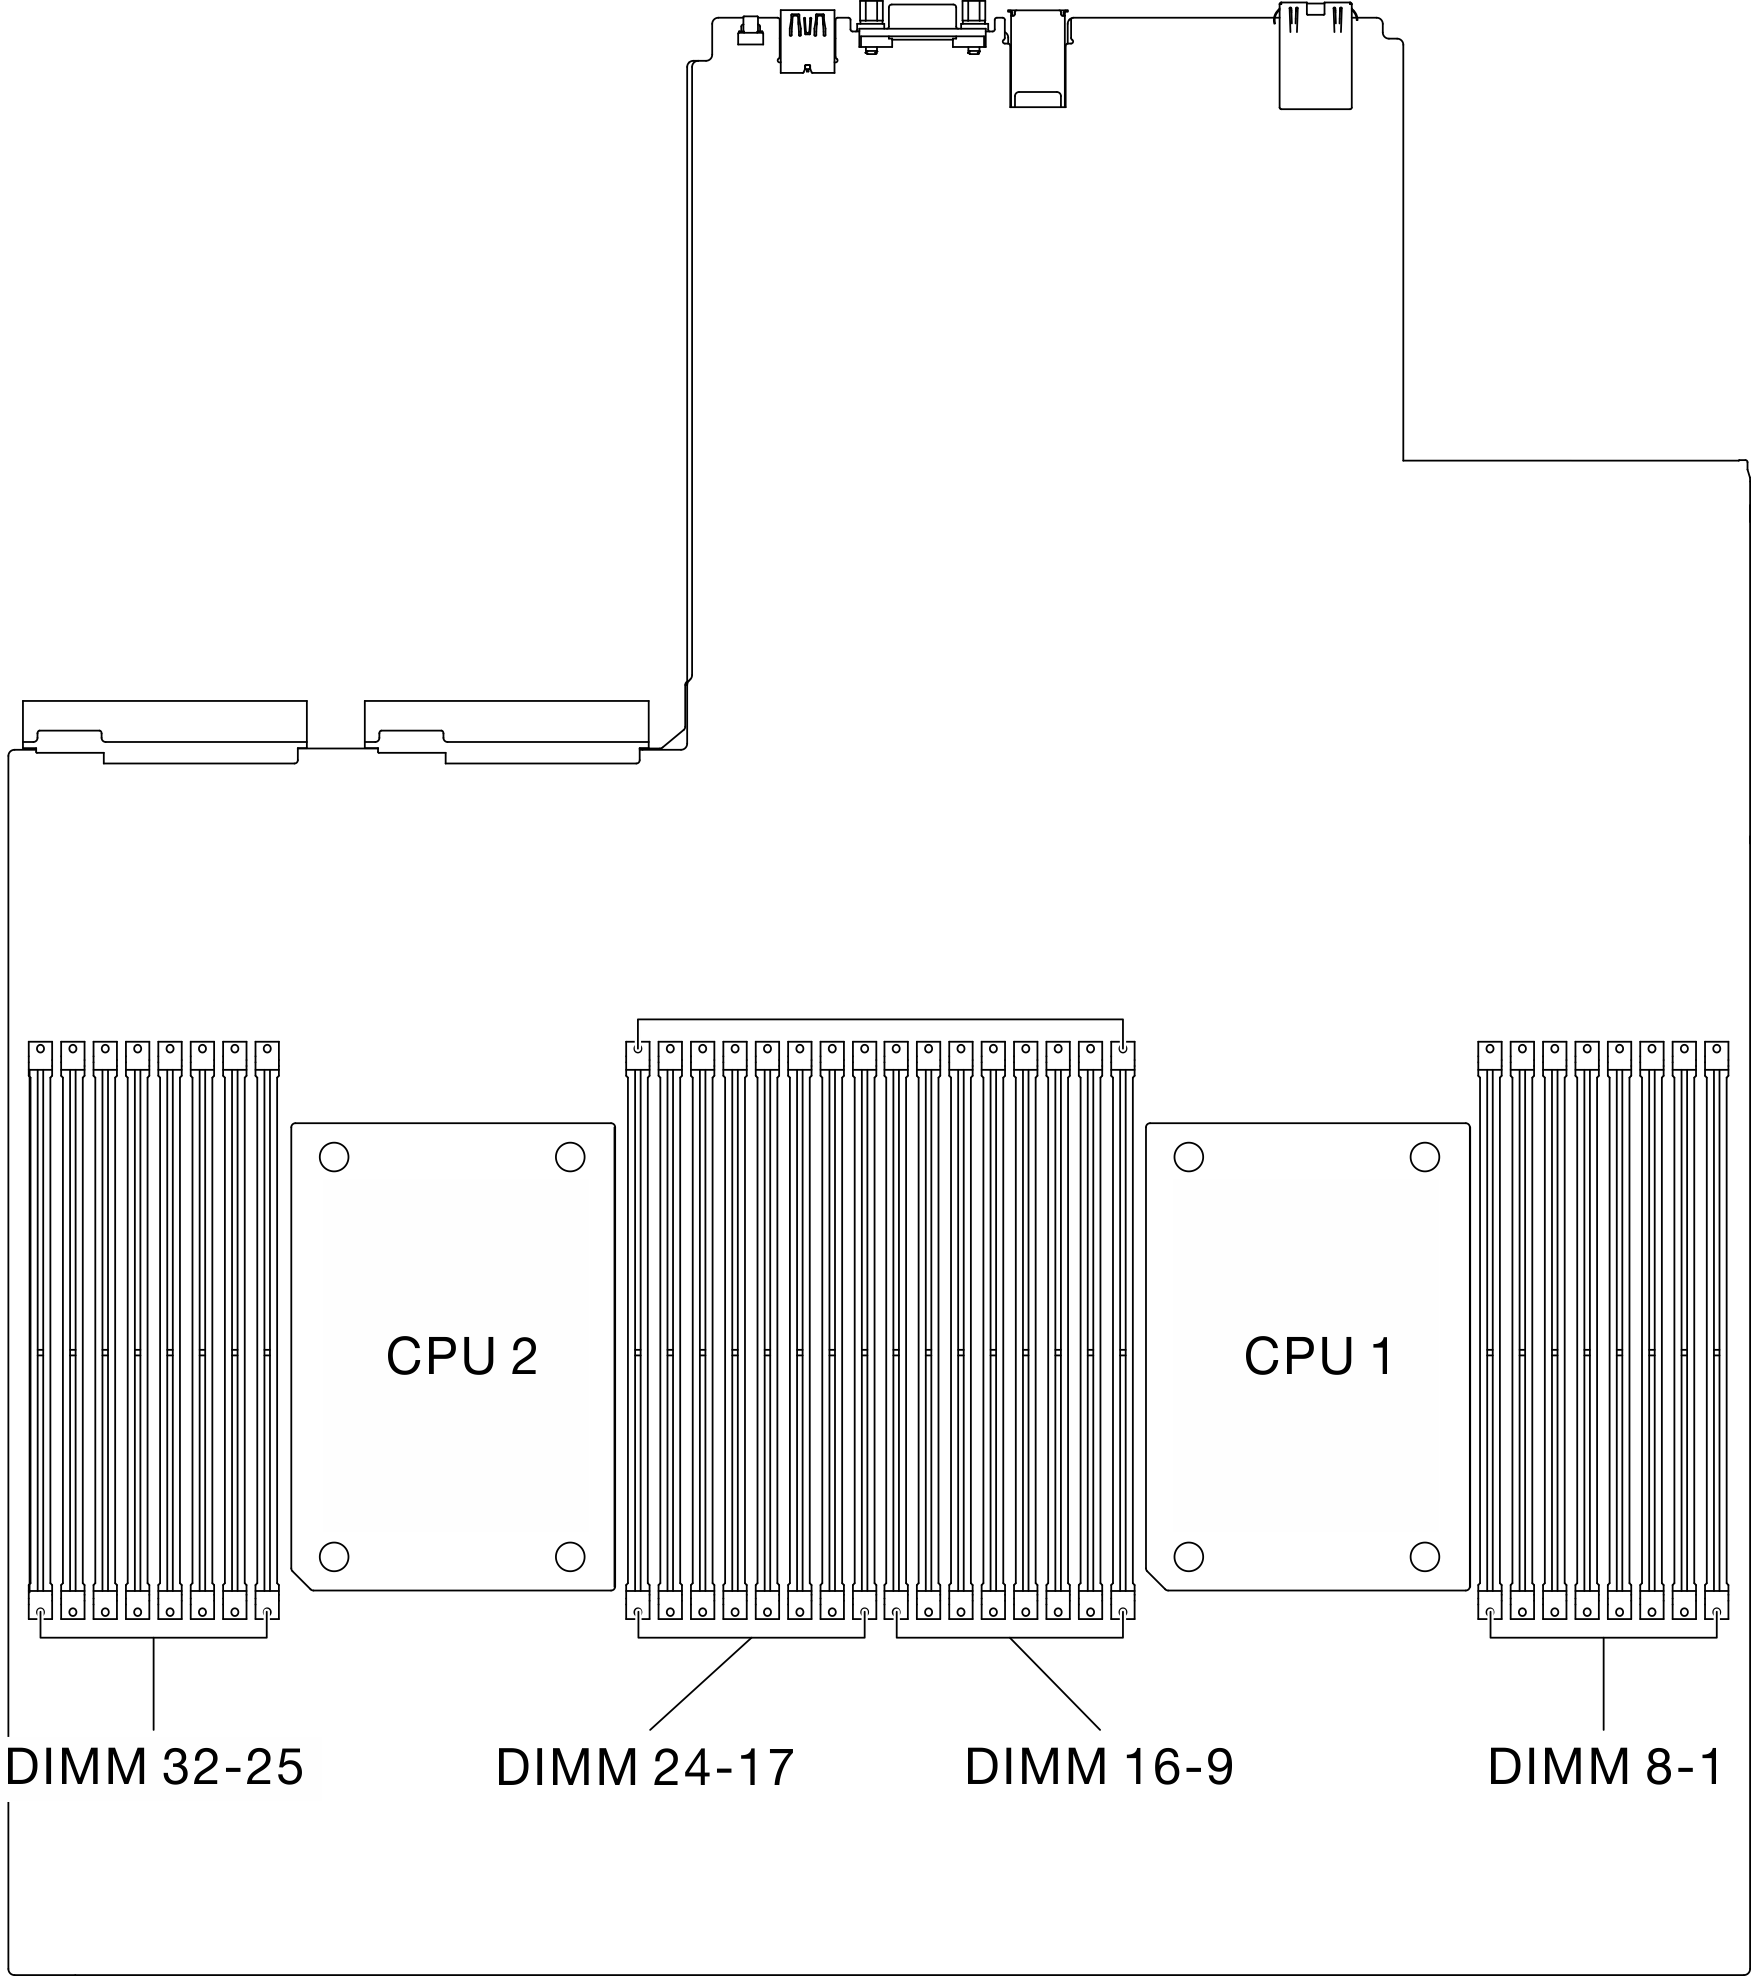 Location of memory module slots and processor sockets